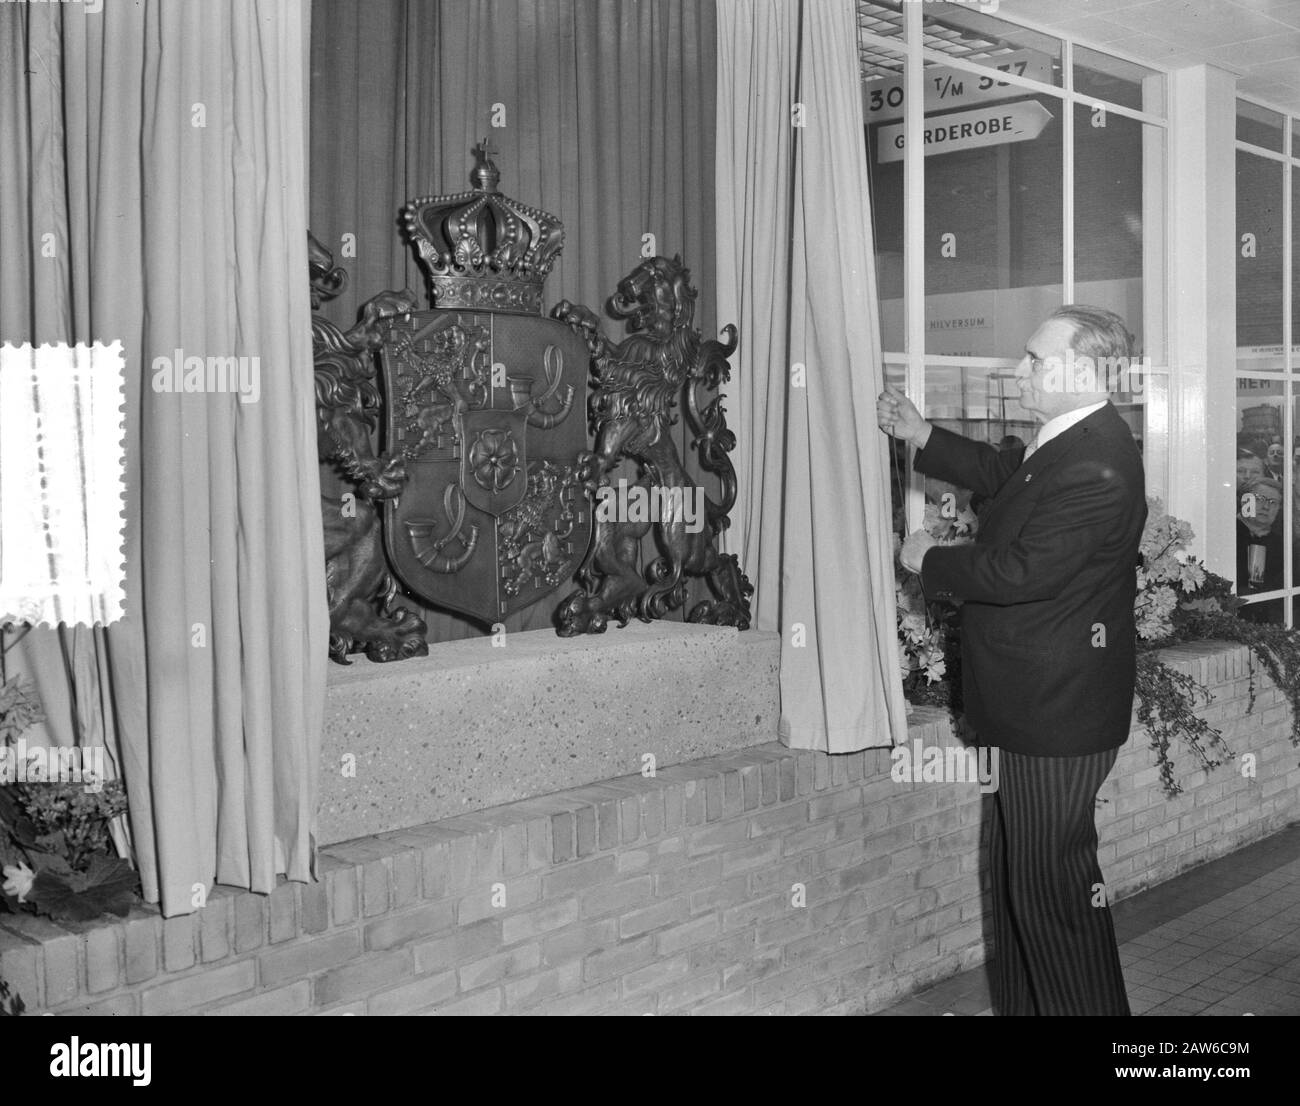 Opening Jaarbeurs Utrecht, Prime Minister Drees Date: March 22, 1955 Location: Utrecht Keywords: Fairs, Openings Person Name: Drees, Willem Stock Photo